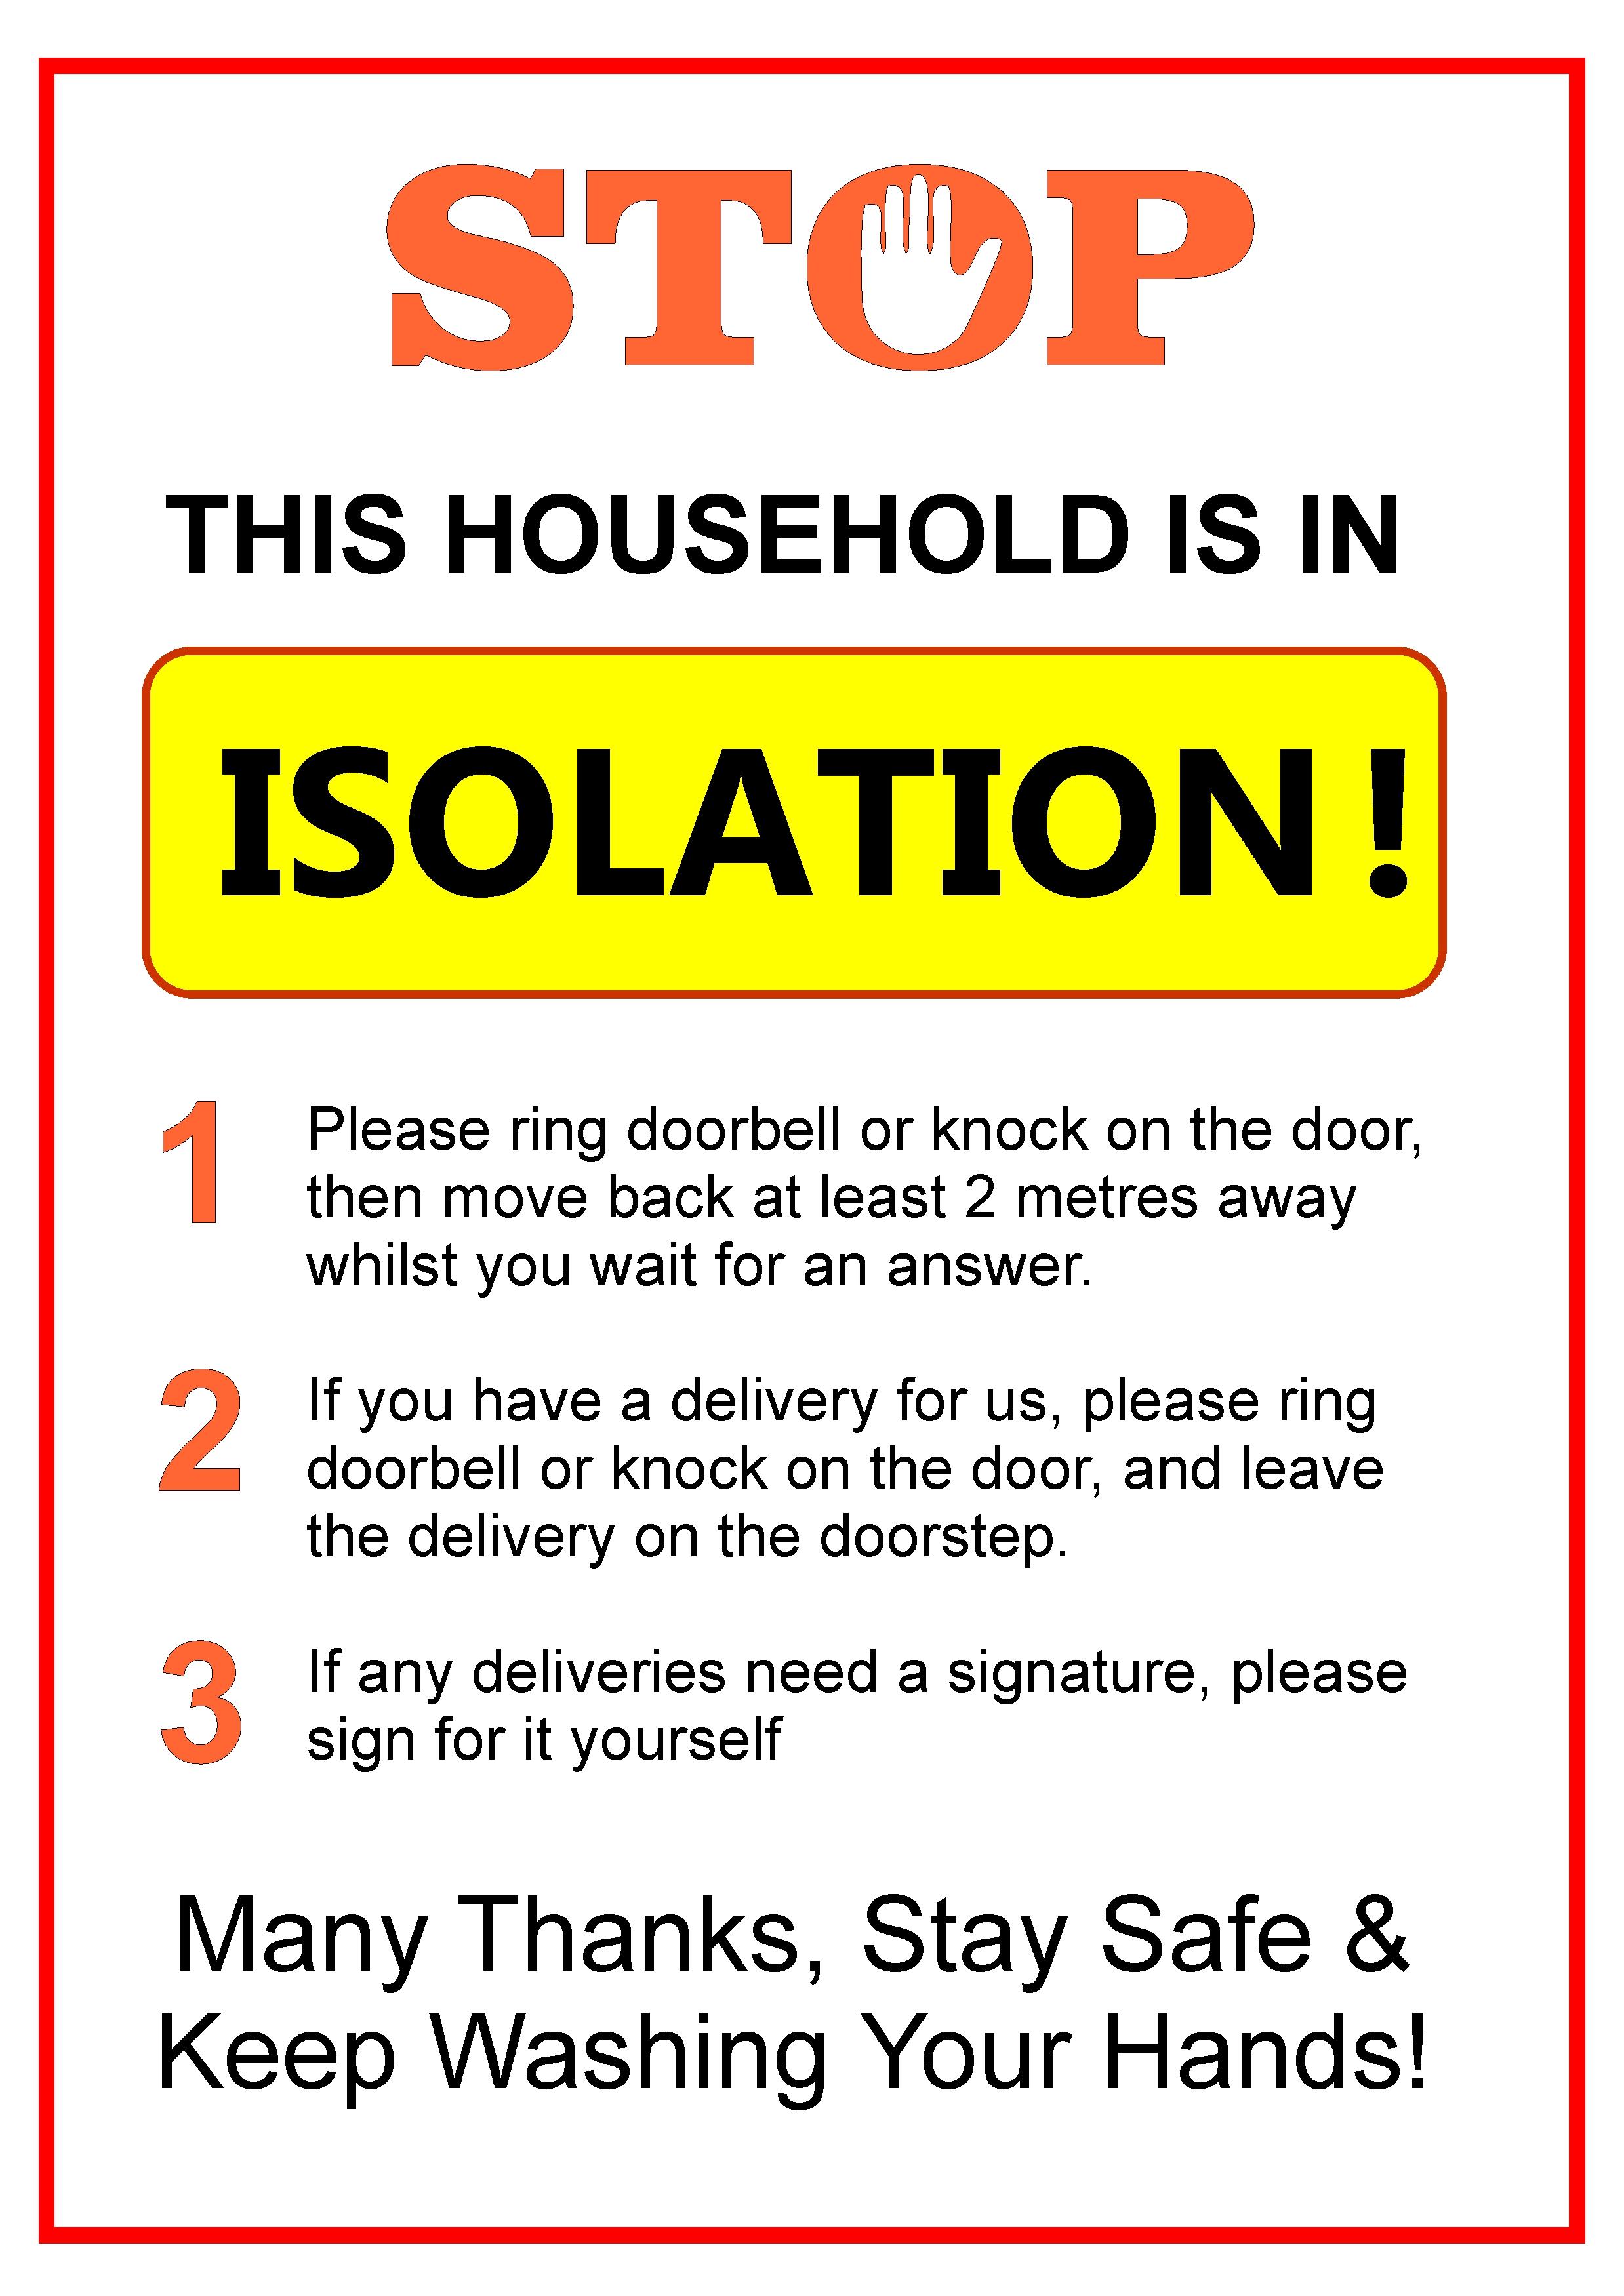 Download Covid-19 self isolation notice